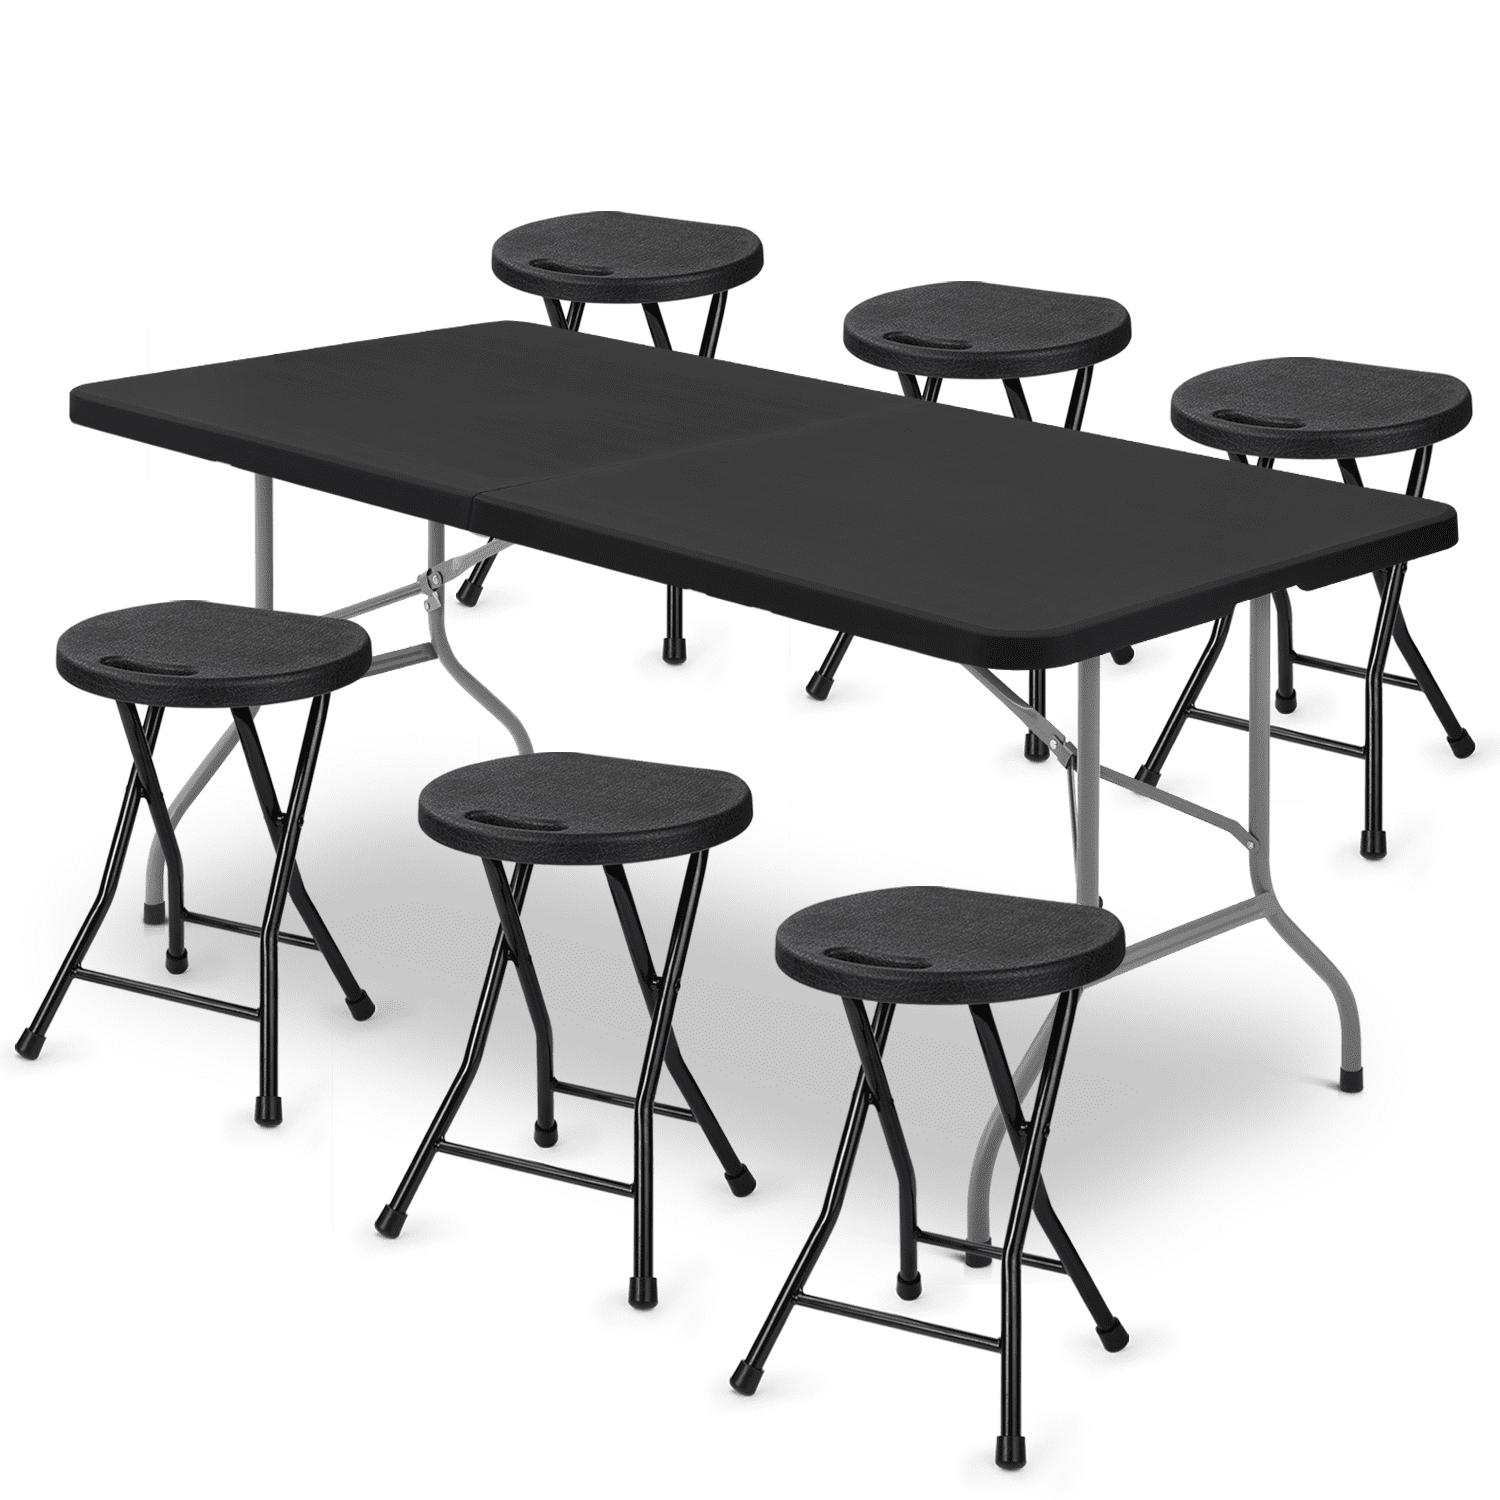 MoNiBloom 7 Pieces 6 FT Folding Table and Chair Set， Indoor Outdoor Picnic Desk with Lock and Foldable Stools for Garden